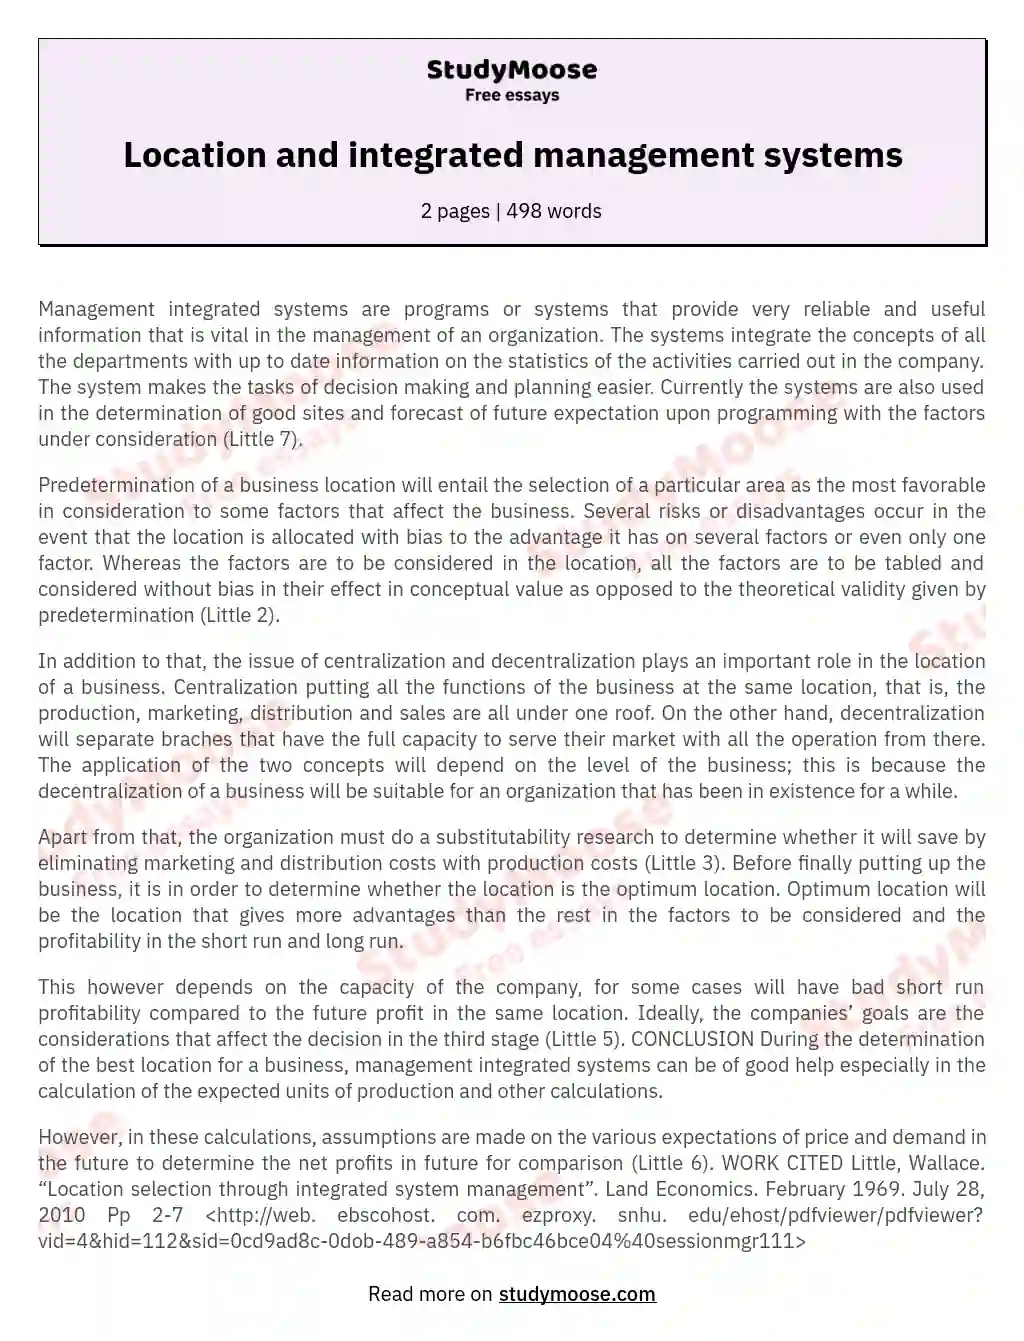 Location and integrated management systems